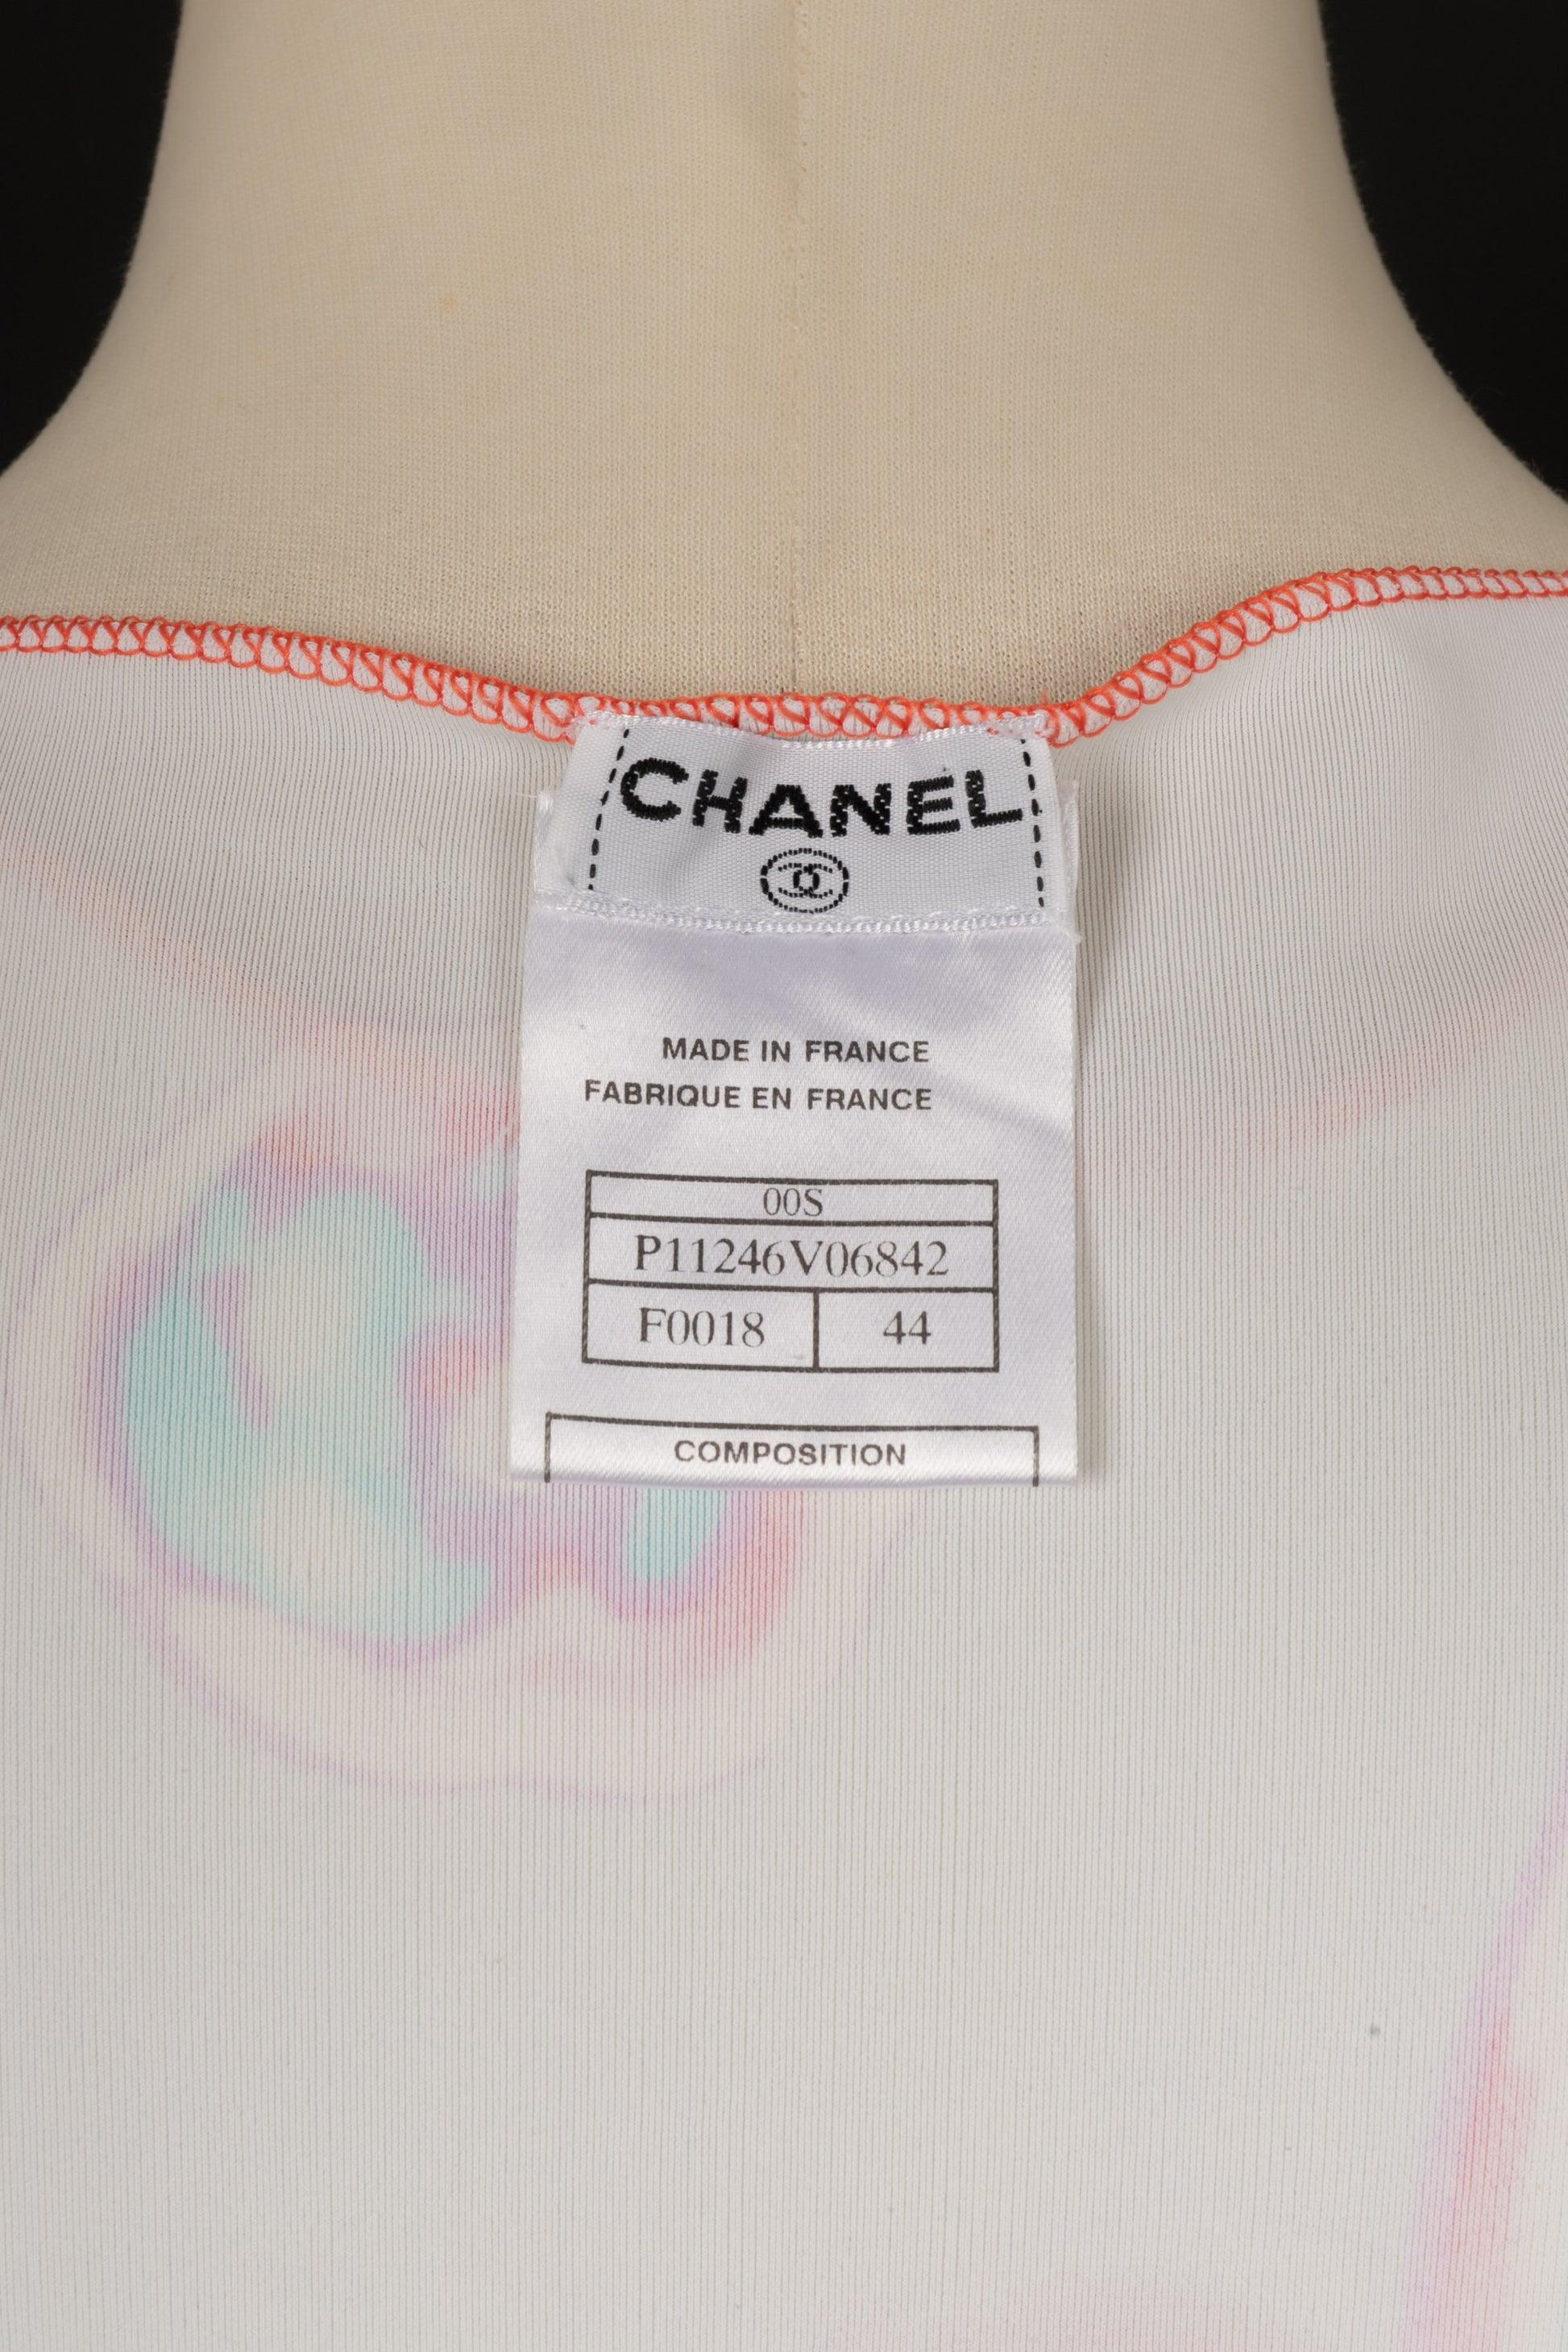 Chanel Polyamide Top / T-Shirt in Pastel Tones, 2000 For Sale 3